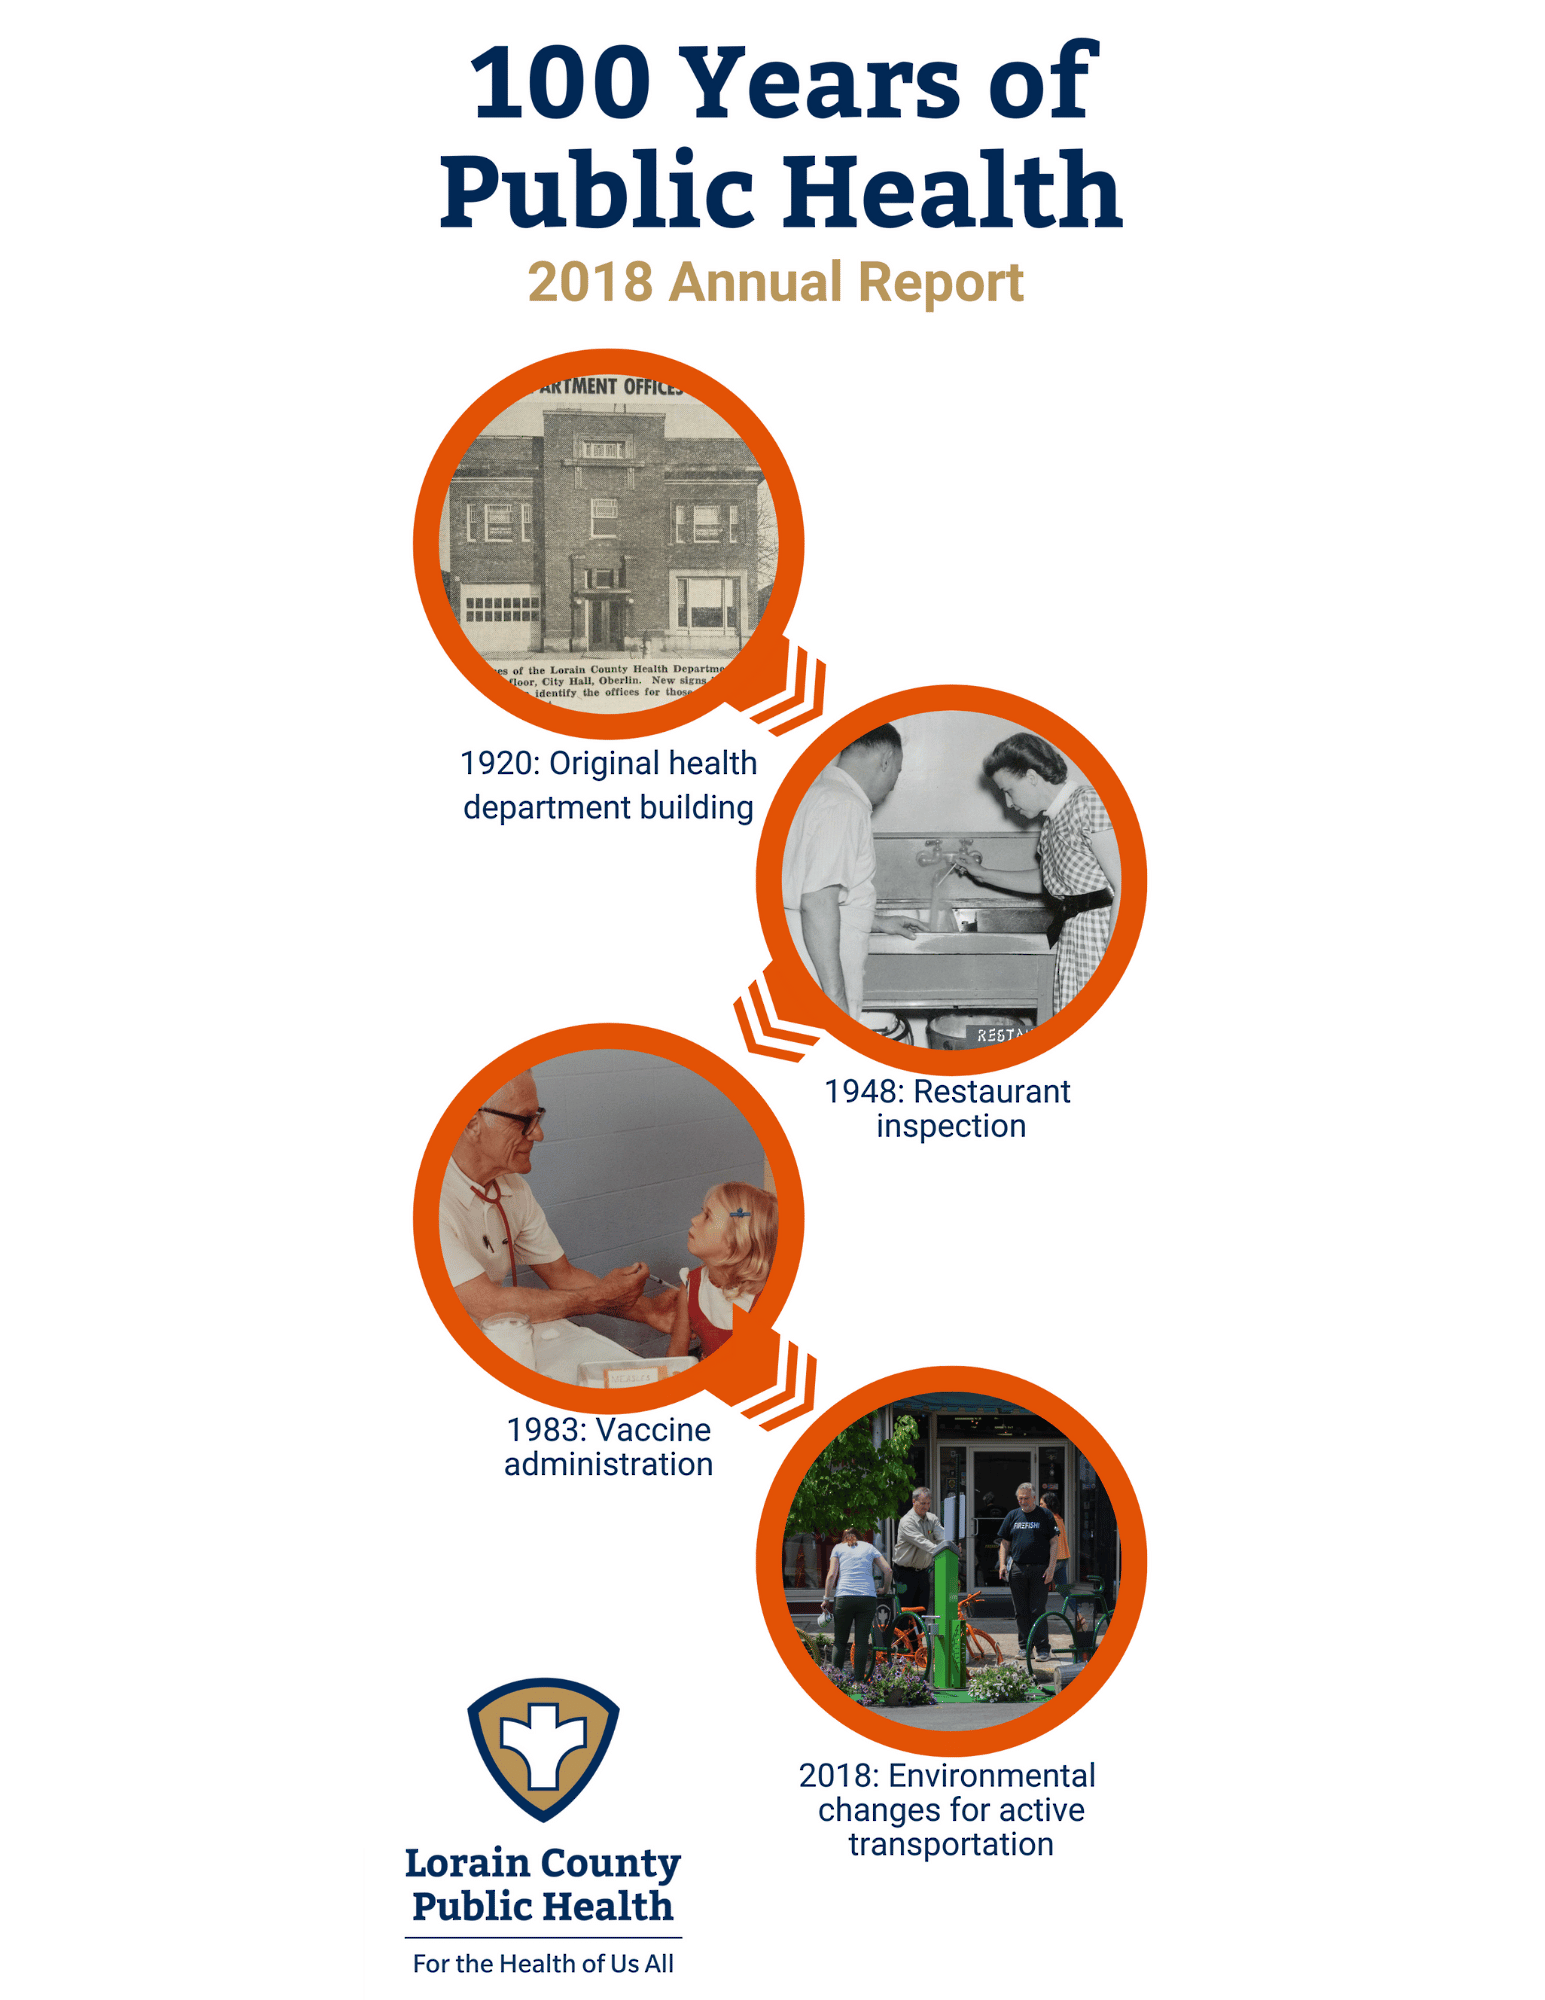 Title: 100 years of public health: 2018 annual report. Photos: 1920: original health department building; 1948: Restaurant inspection; 1983: Vaccine administration; 2018: Environmental changes